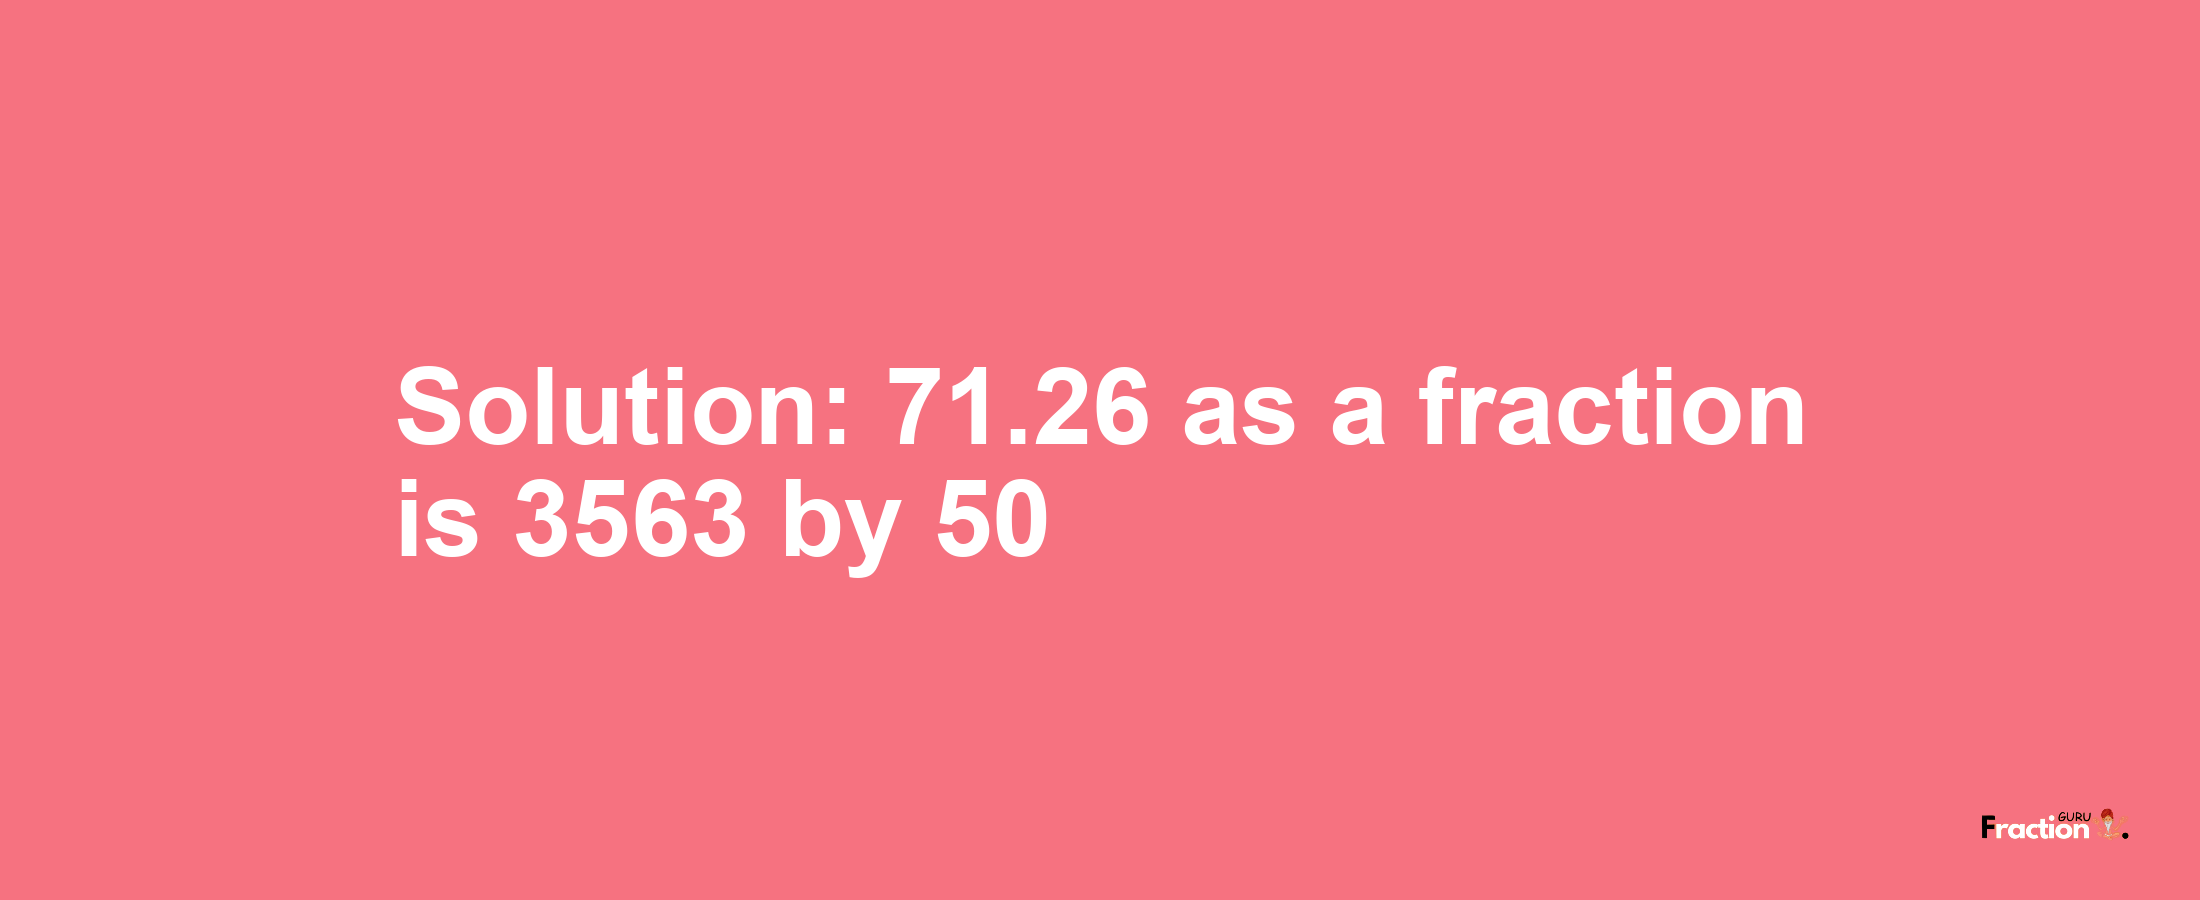 Solution:71.26 as a fraction is 3563/50